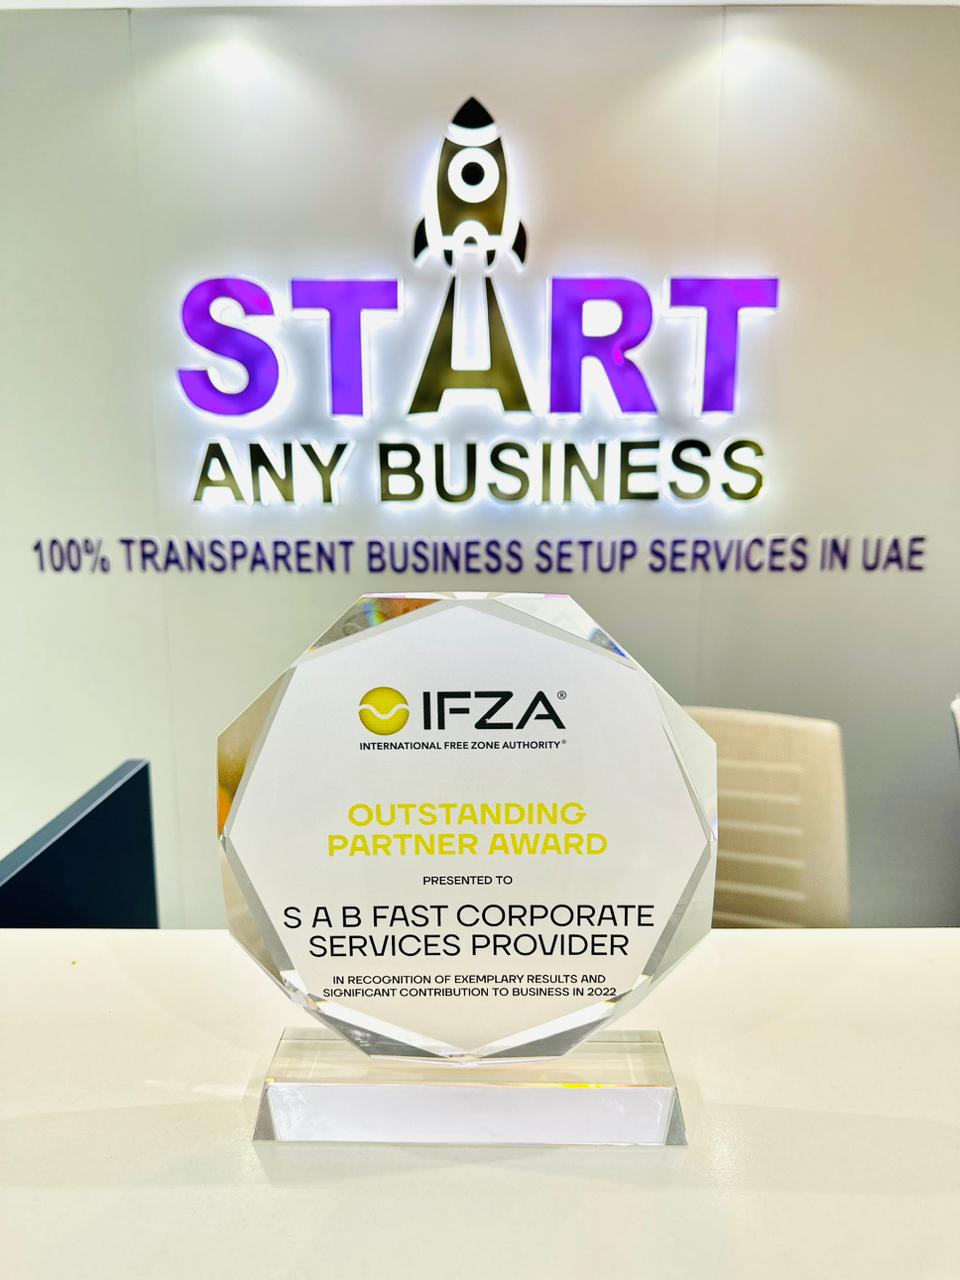 SAB and IFZA A Dynamic Duo Changing the Game for Business Setup in Dubai